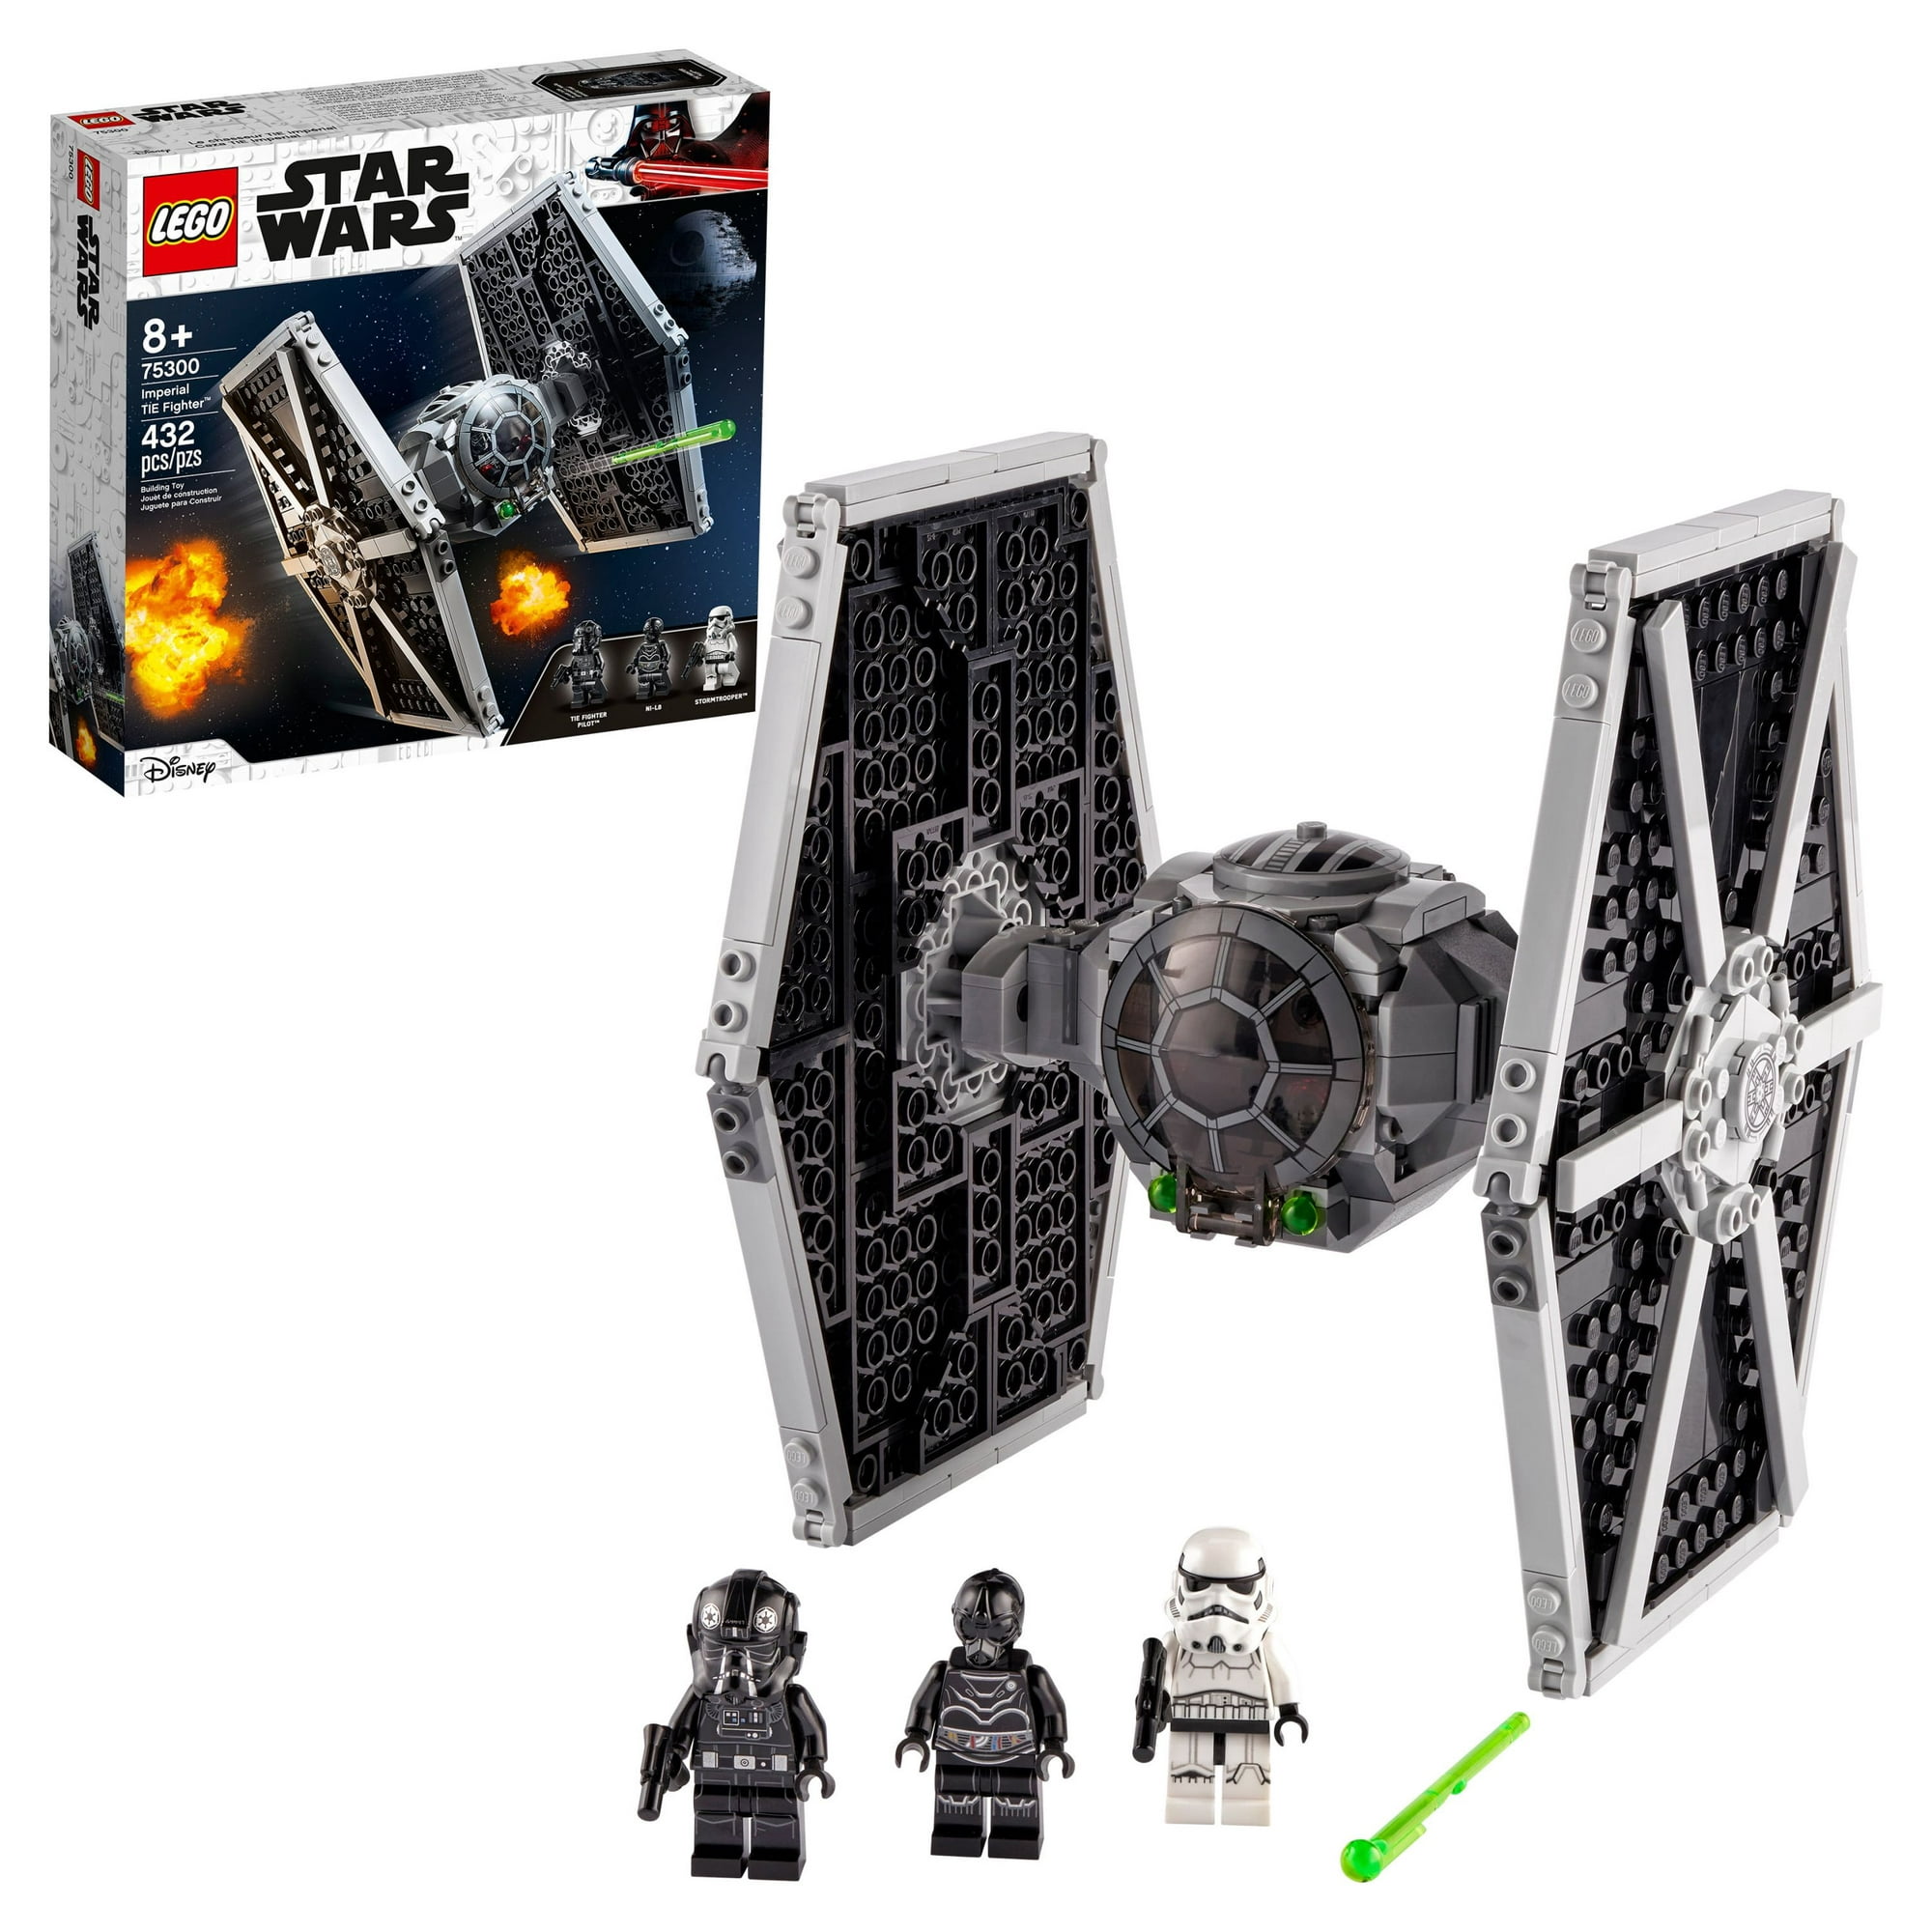 LEGO Star Wars Imperial TIE Fighter 75300 with Stormtrooper and TIE Fighter Pilot Minifigure